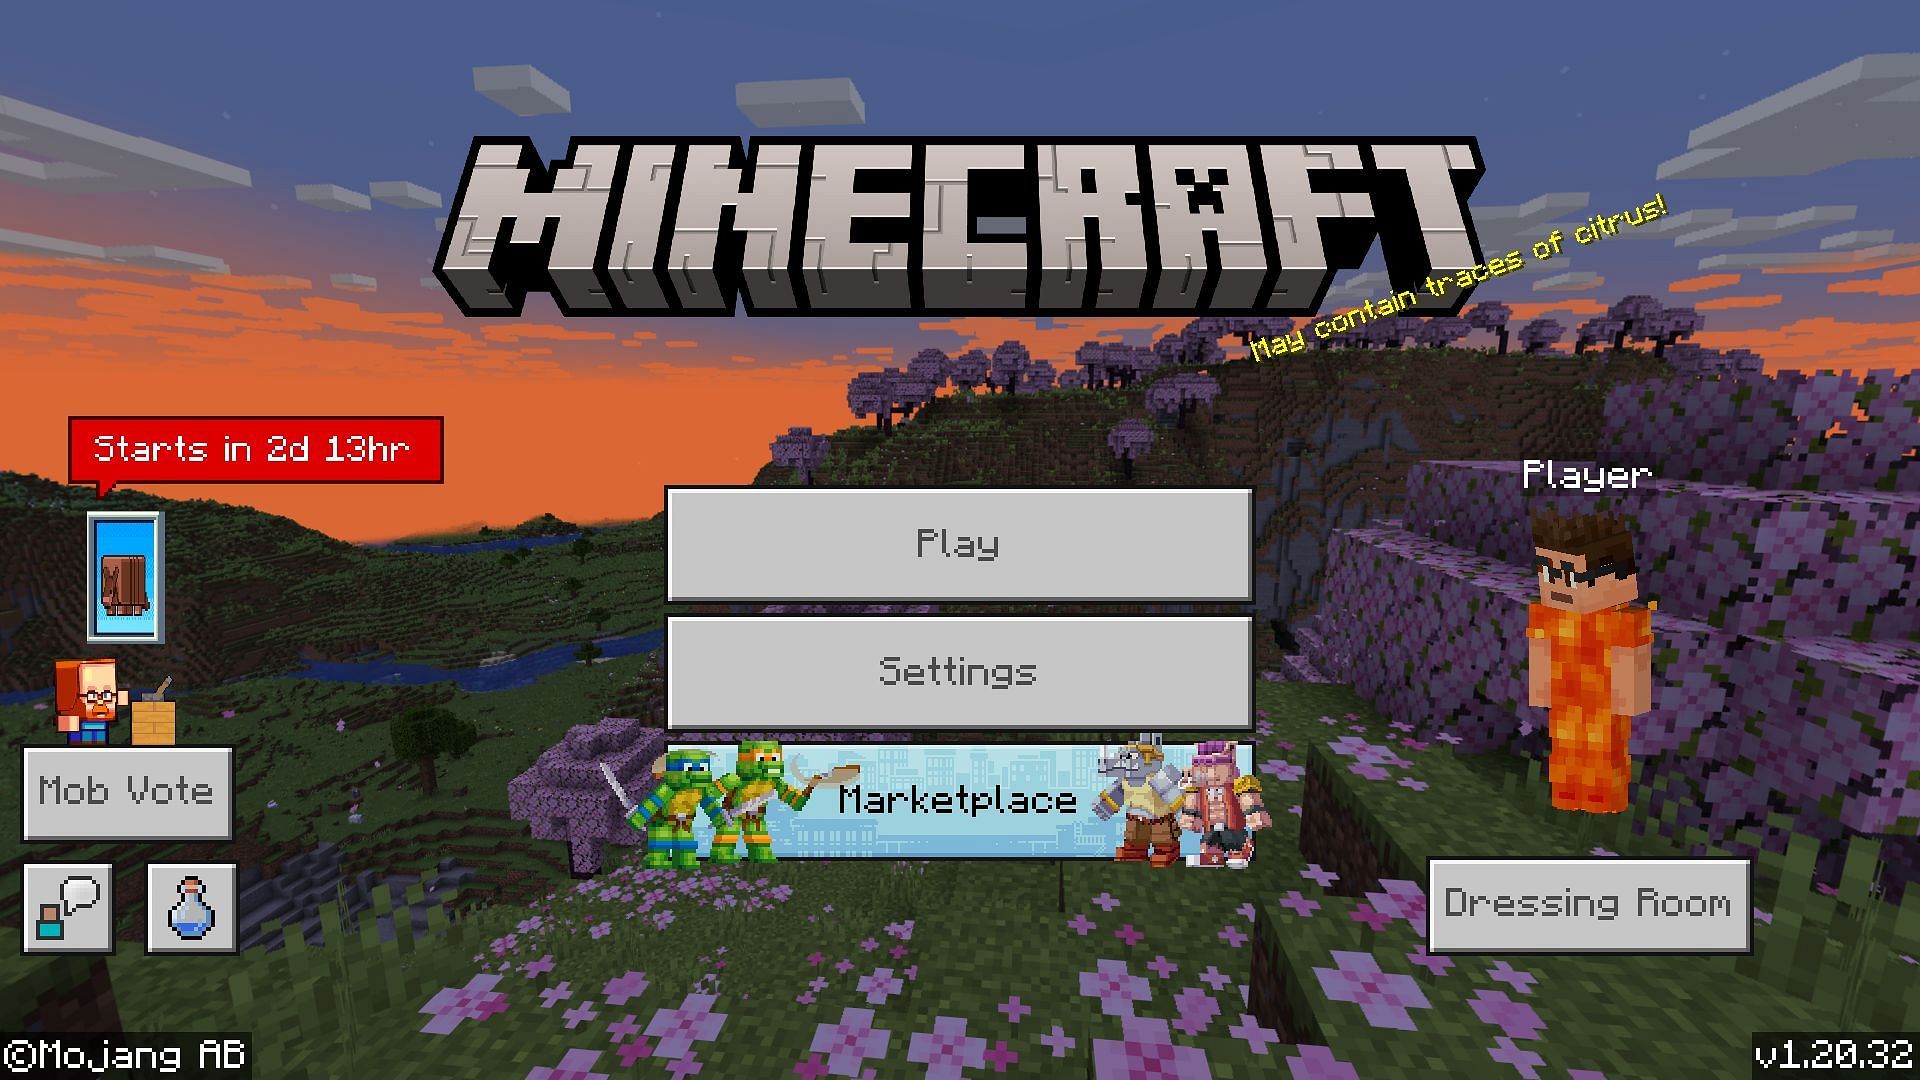 Minecraft Marketplace can be accessed from the game itself (Image via Mojang)